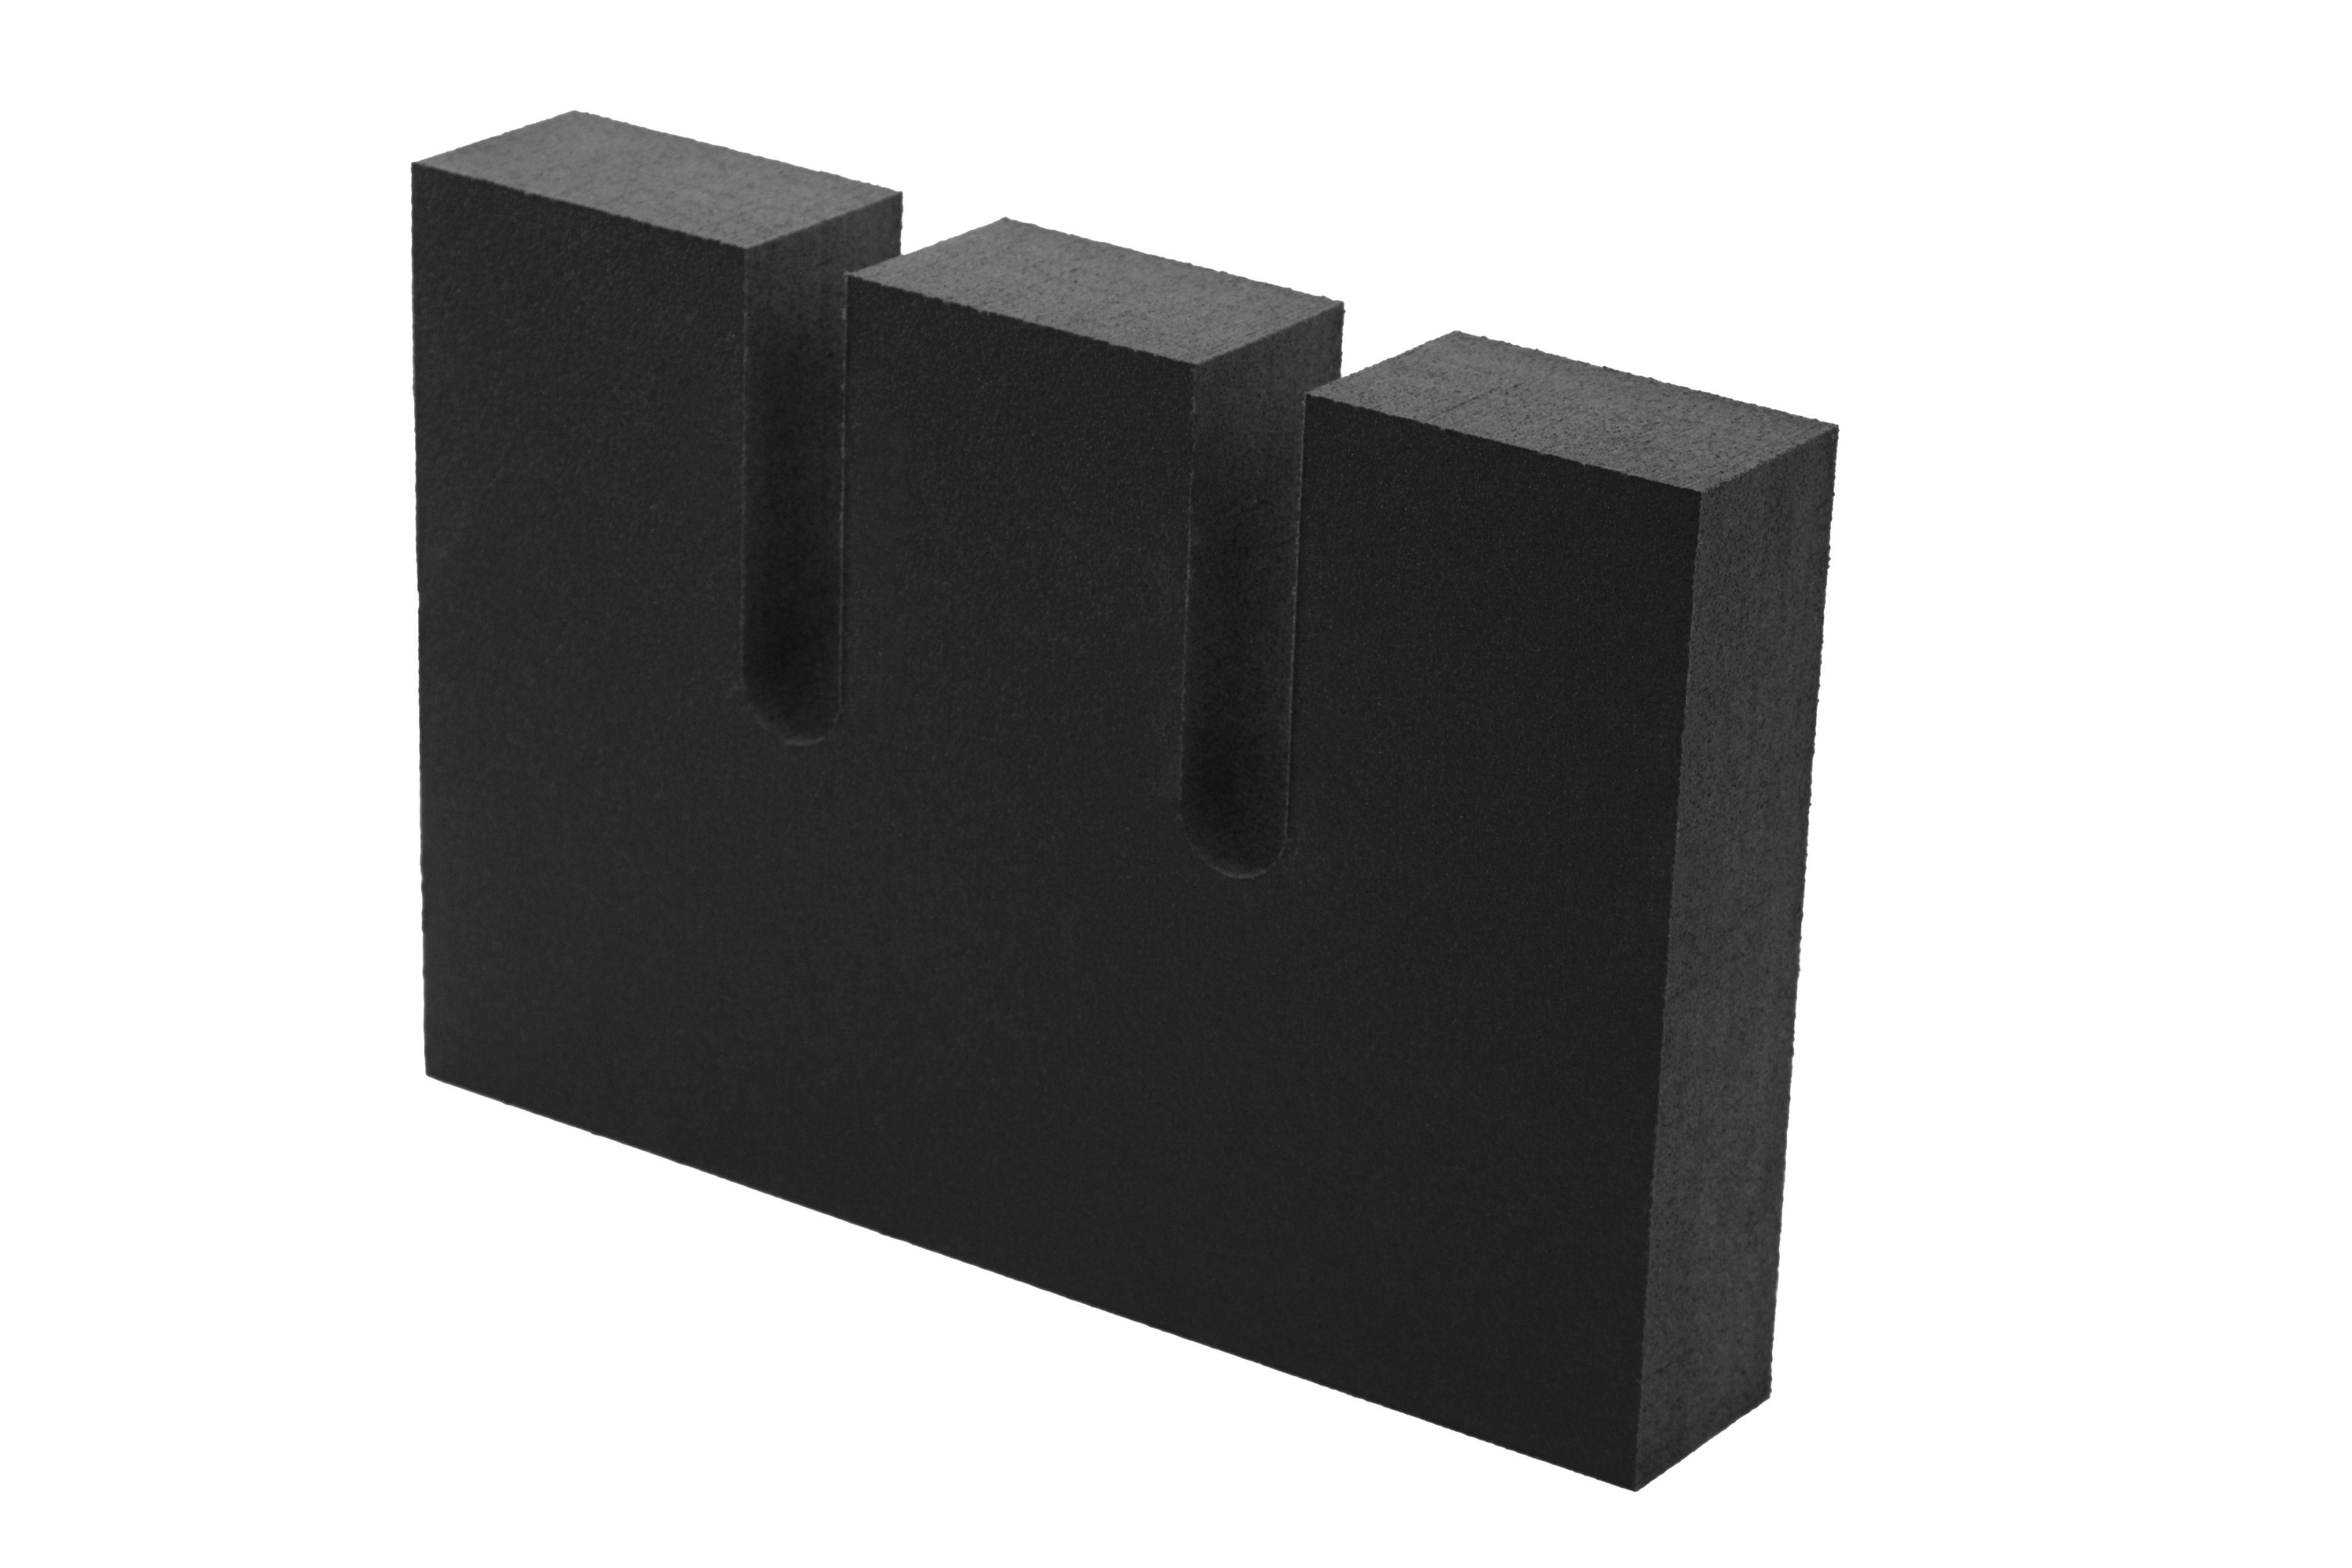 Heavy Duty Foam Dunnage Reusable Cushion for Shipping Box Crate Straight Slot 12x8x2 1 Pack